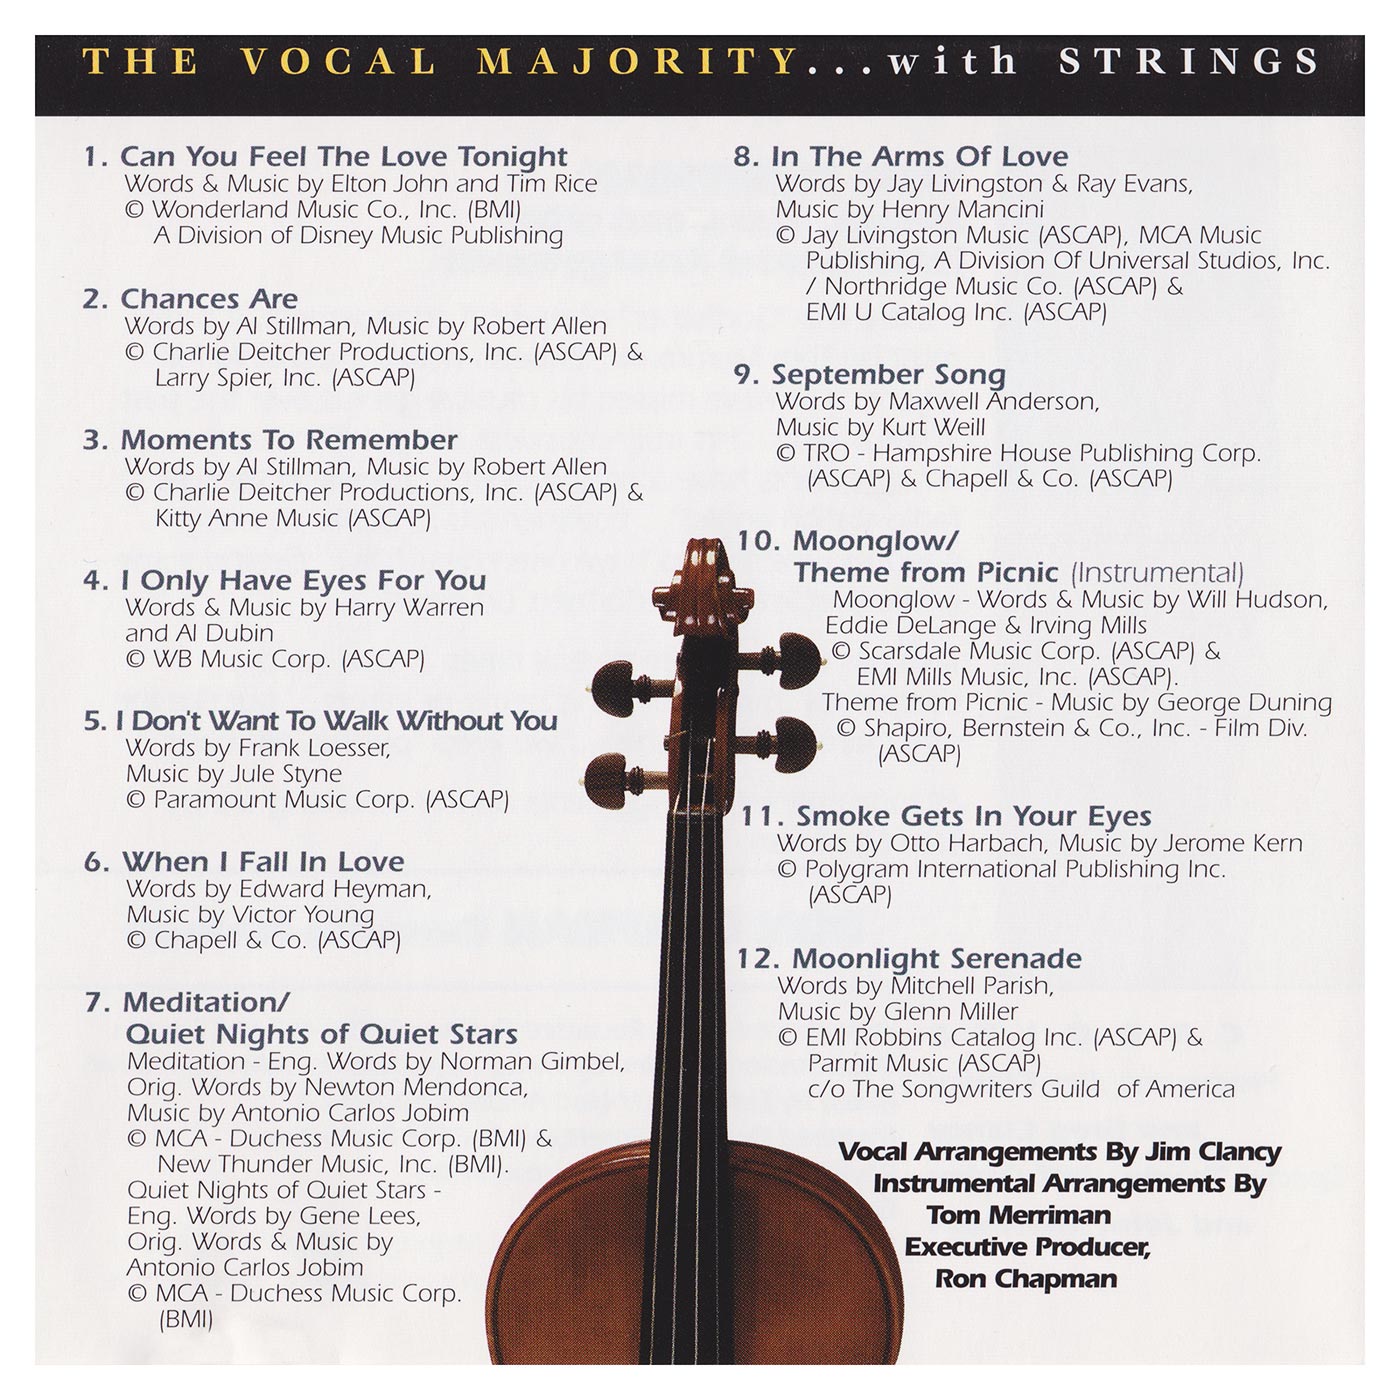 Booklet Outside Back Panel: VM with Strings Vol. 1